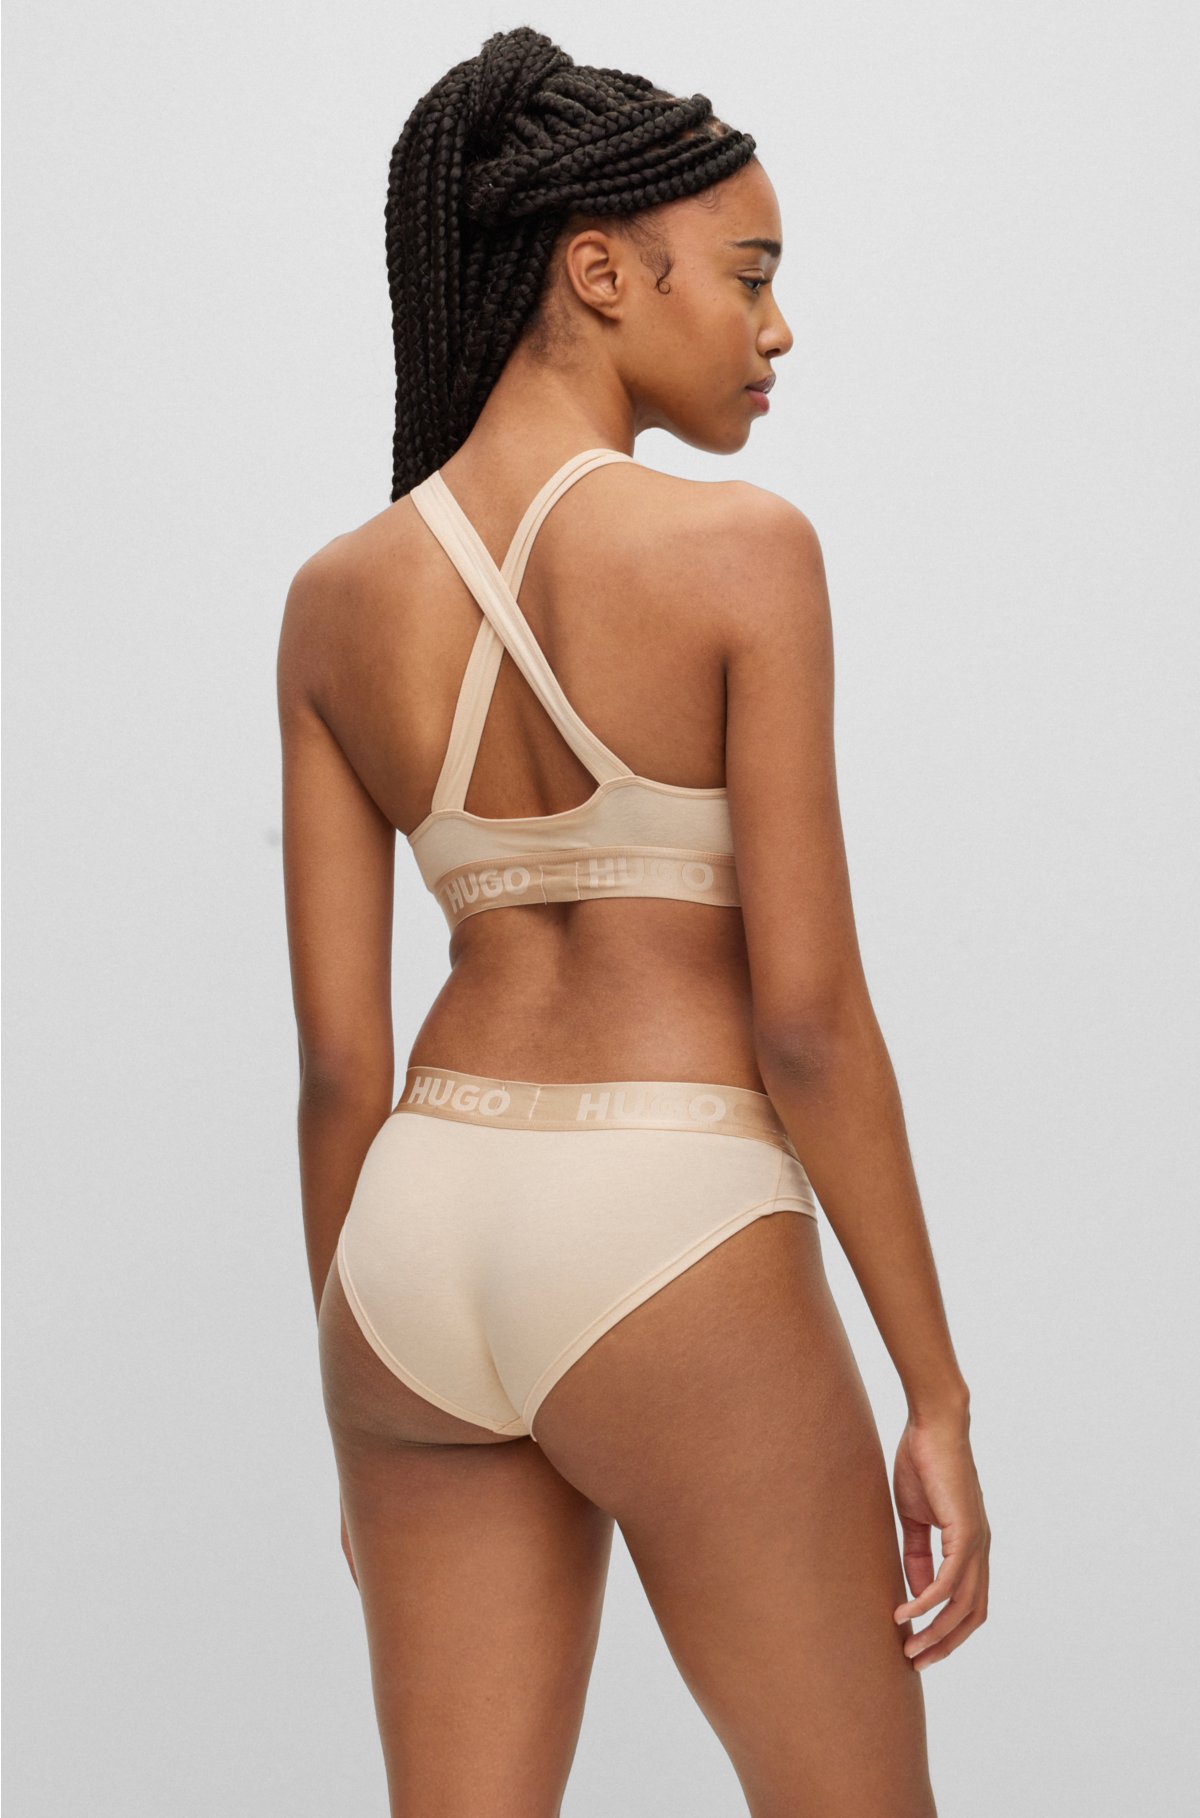 HUGO Bralette logos stretch - in cotton with repeat